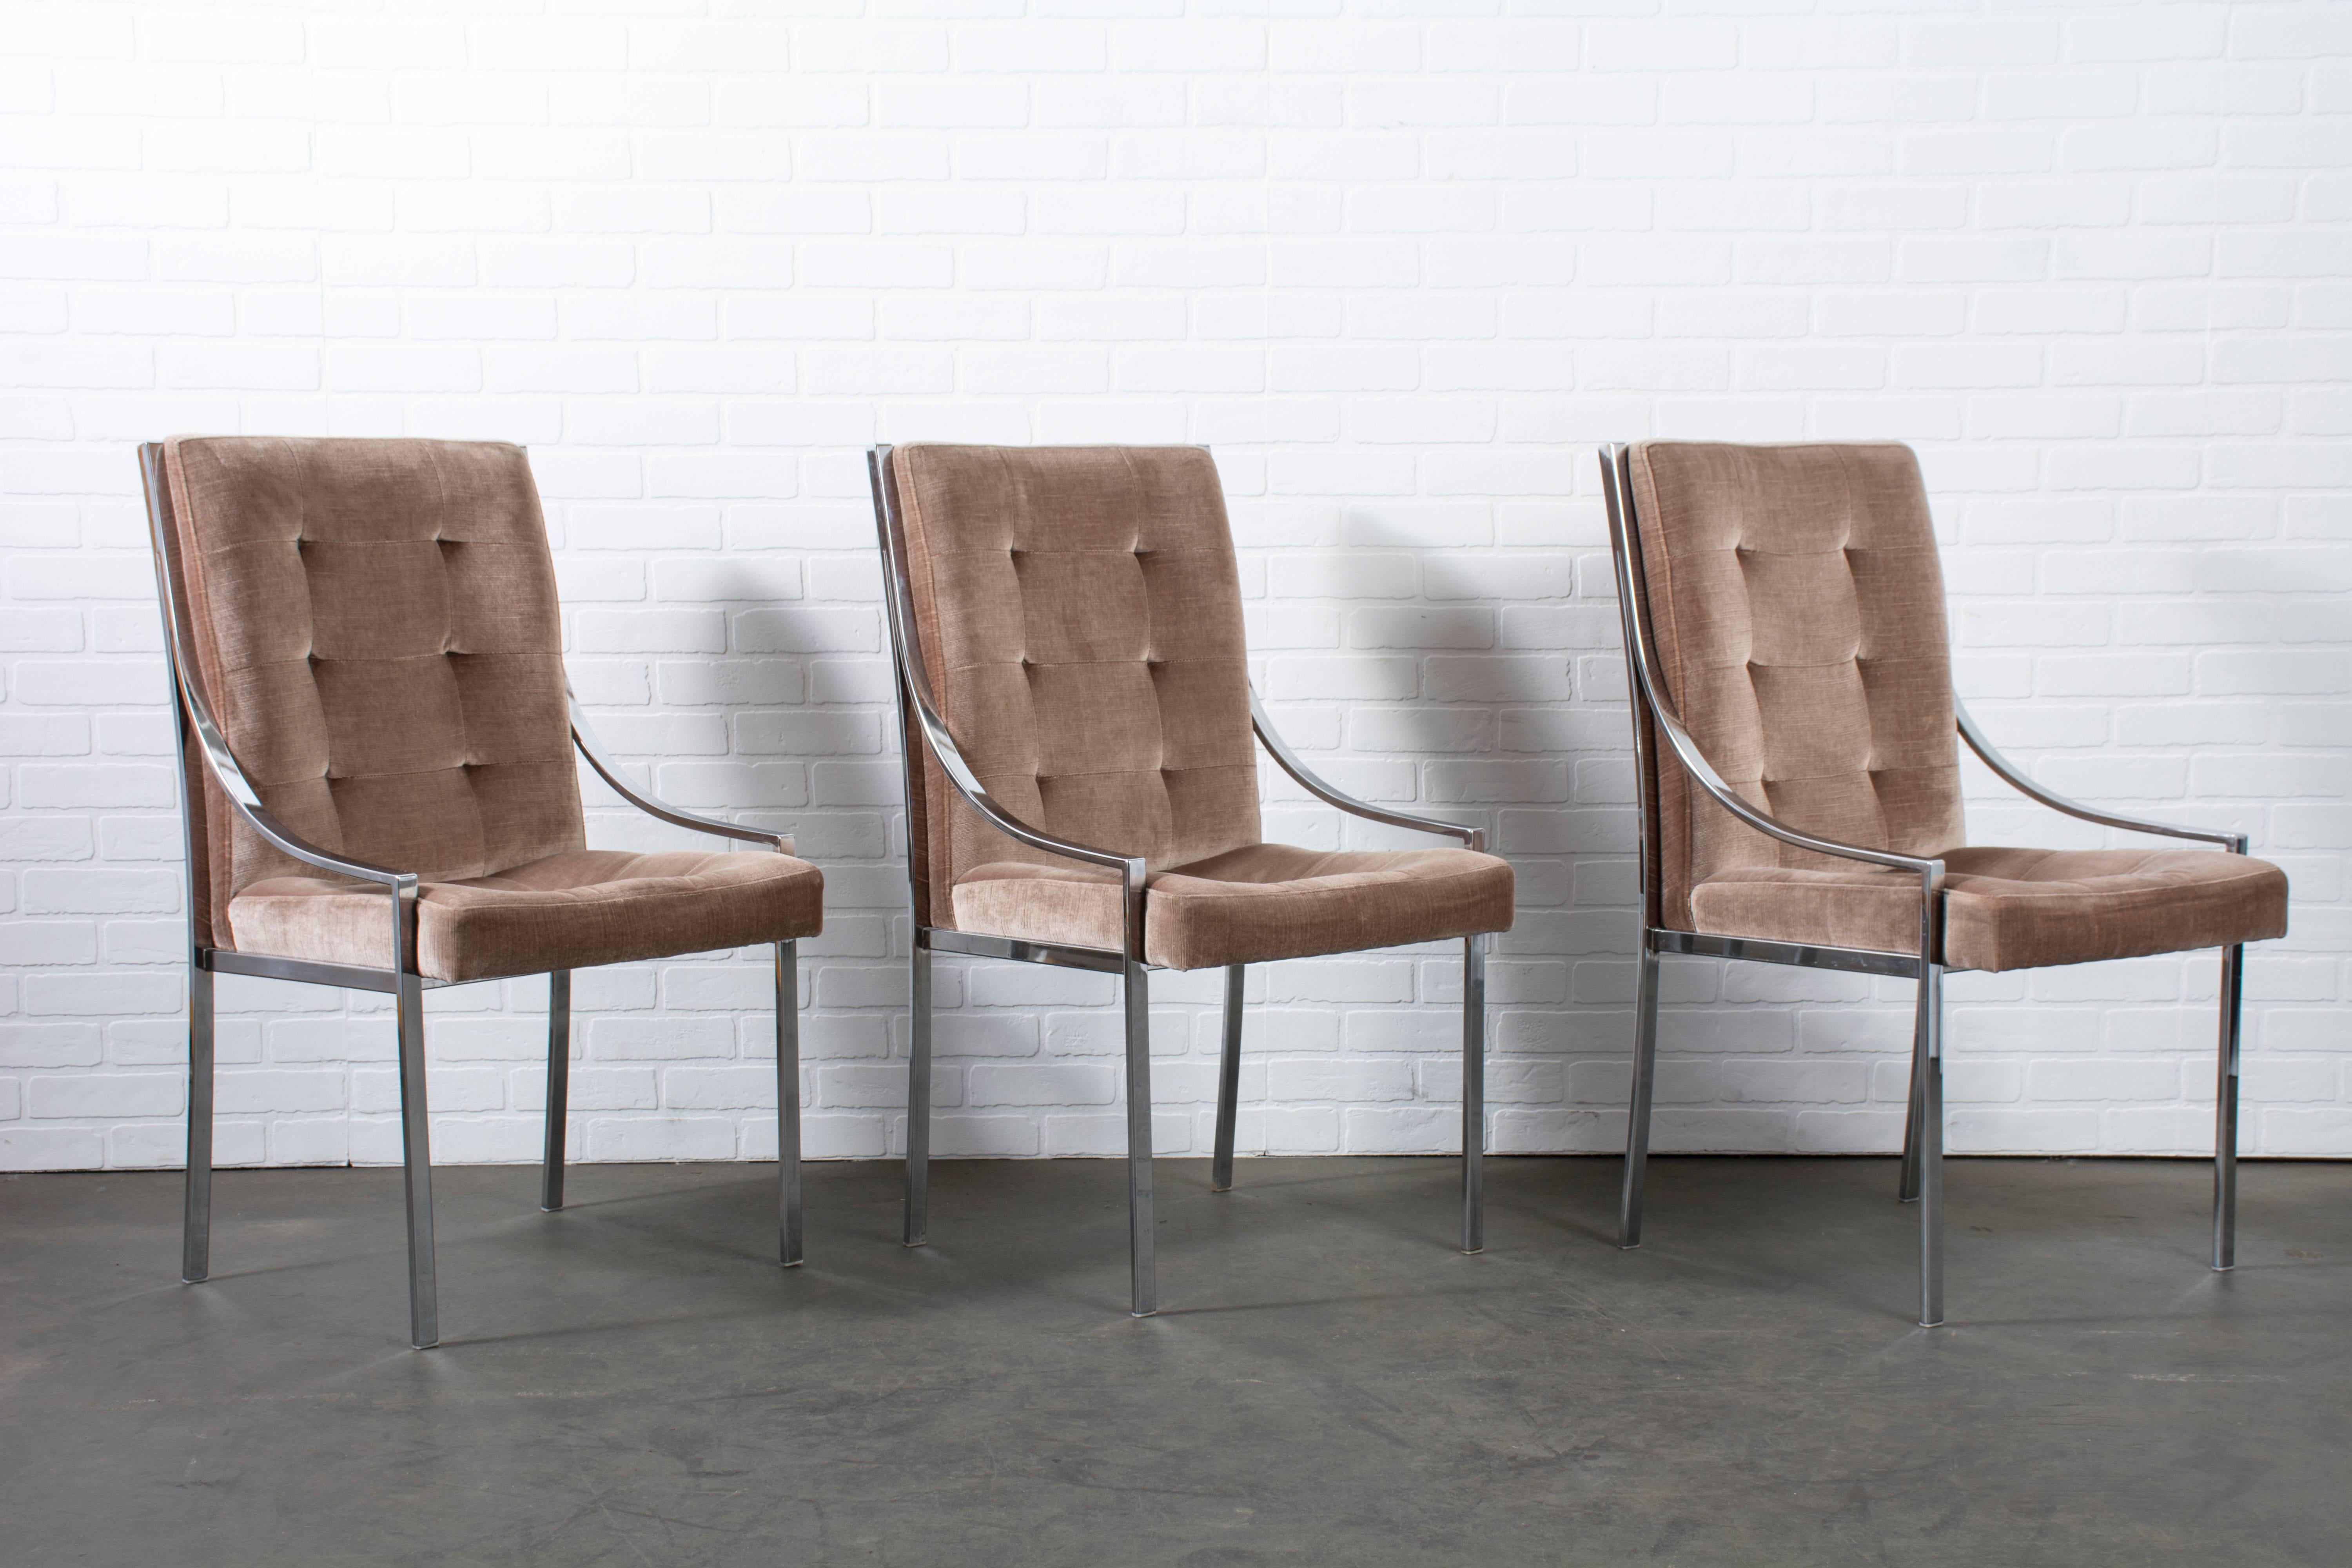 This is a set of six vintage dining chairs by Pierre Cardin, circa 1970s. They feature chrome-plated metal frames and the original brown tufted upholstery. This is a great set to reupholster in the fabric of your choice.
 